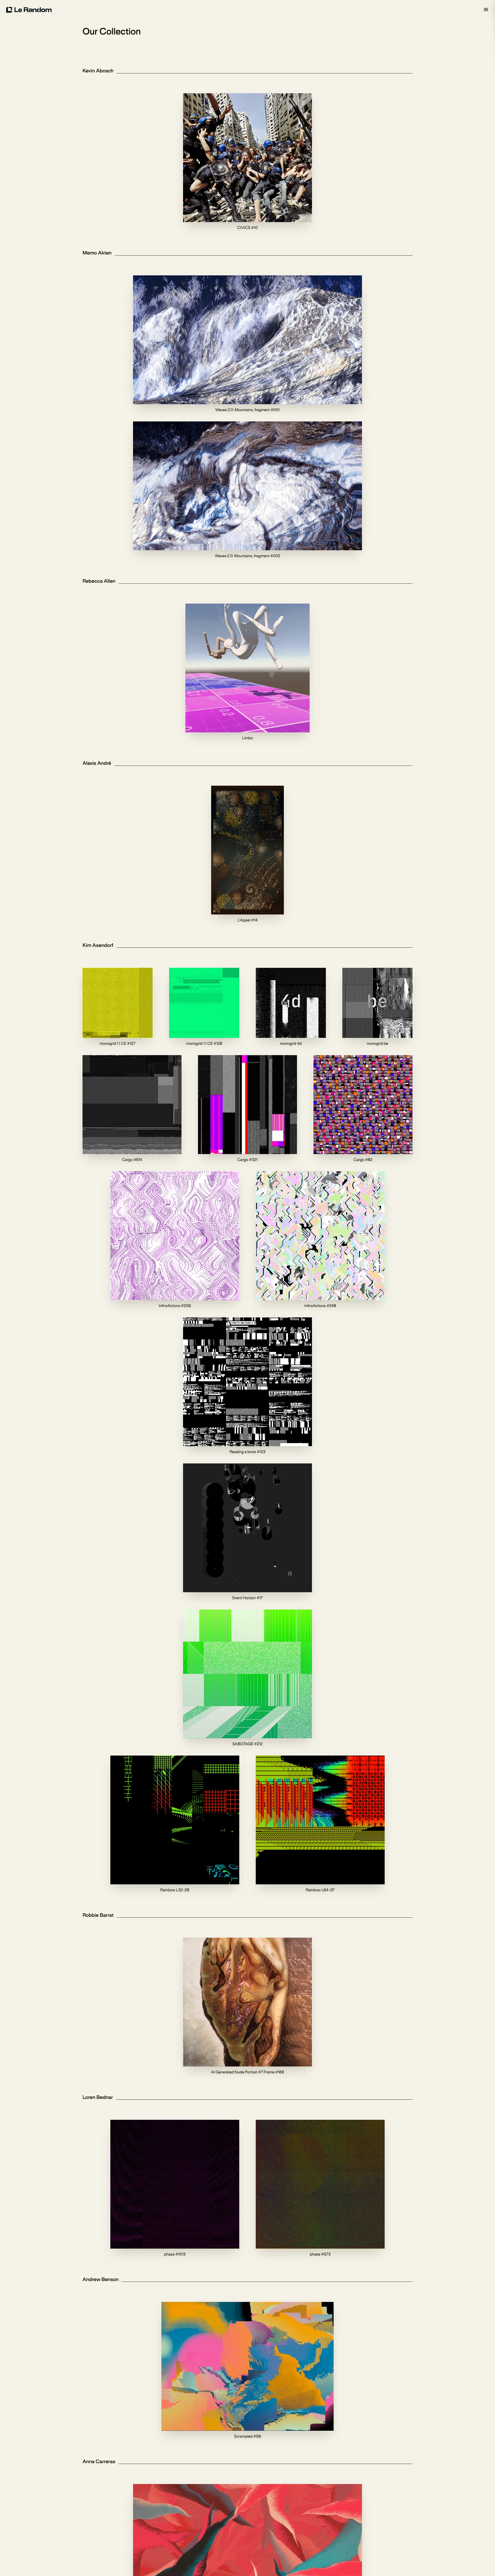 Le Random Landing Page Example: We are building a digital generative art institution that contextualizes and elevates the most significant work from iconic generative artists.